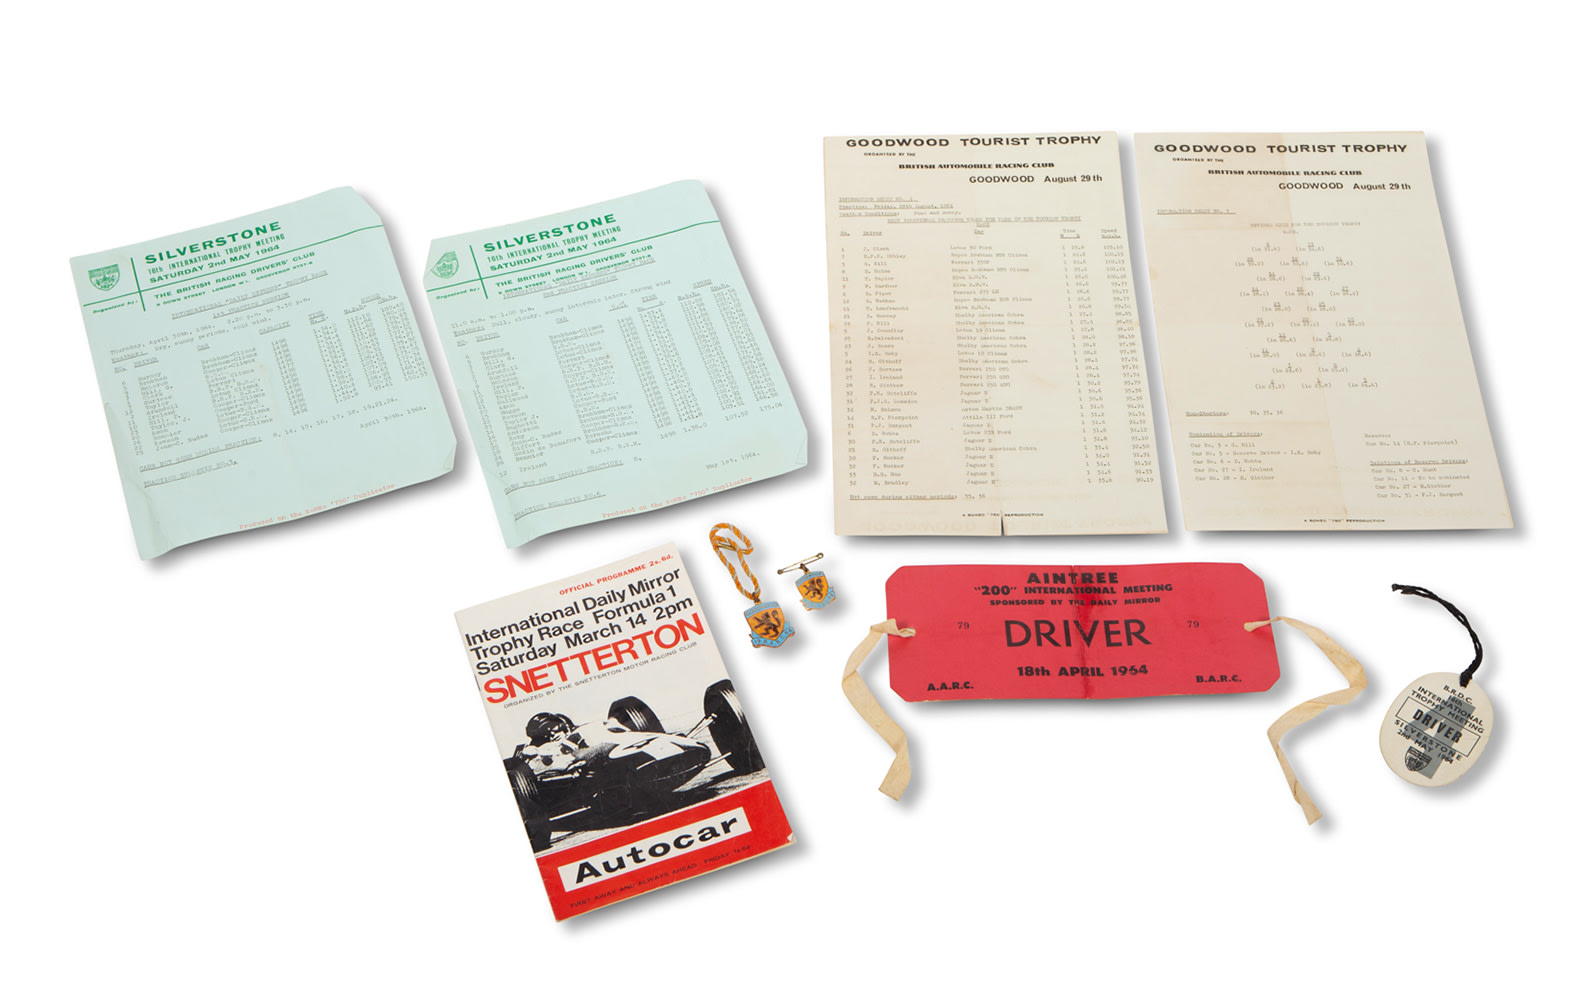 Assorted 1964 Literature and Memorabilia Related to Aintree, Goodwood, Silverstone, and Snetterton